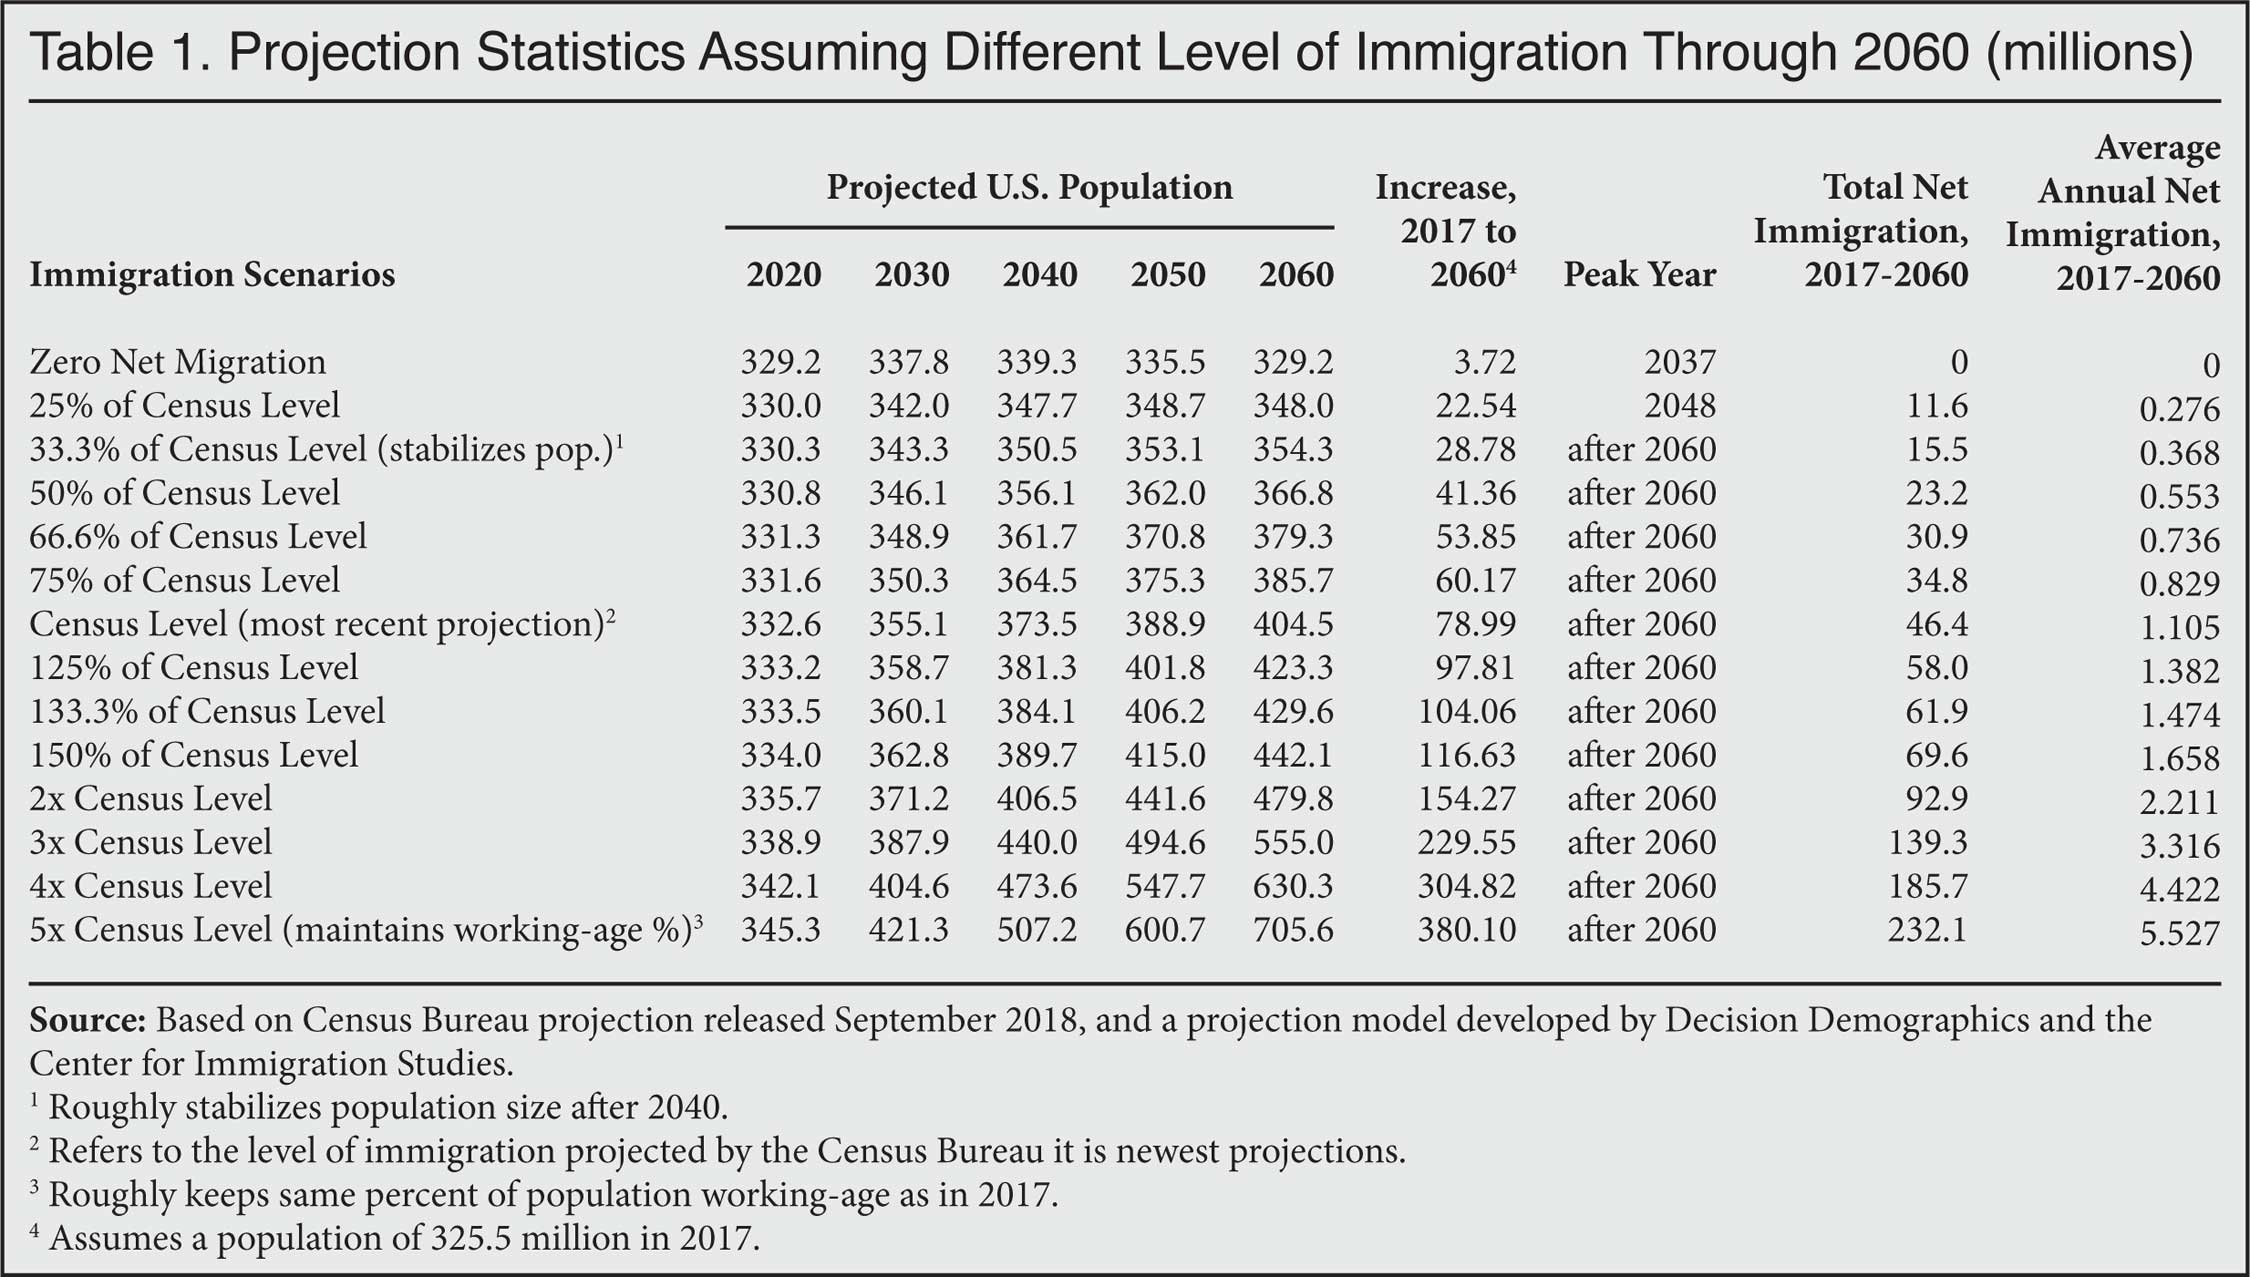 Table: Projection Statistics Assuming Different Level of Immigration Through 2060